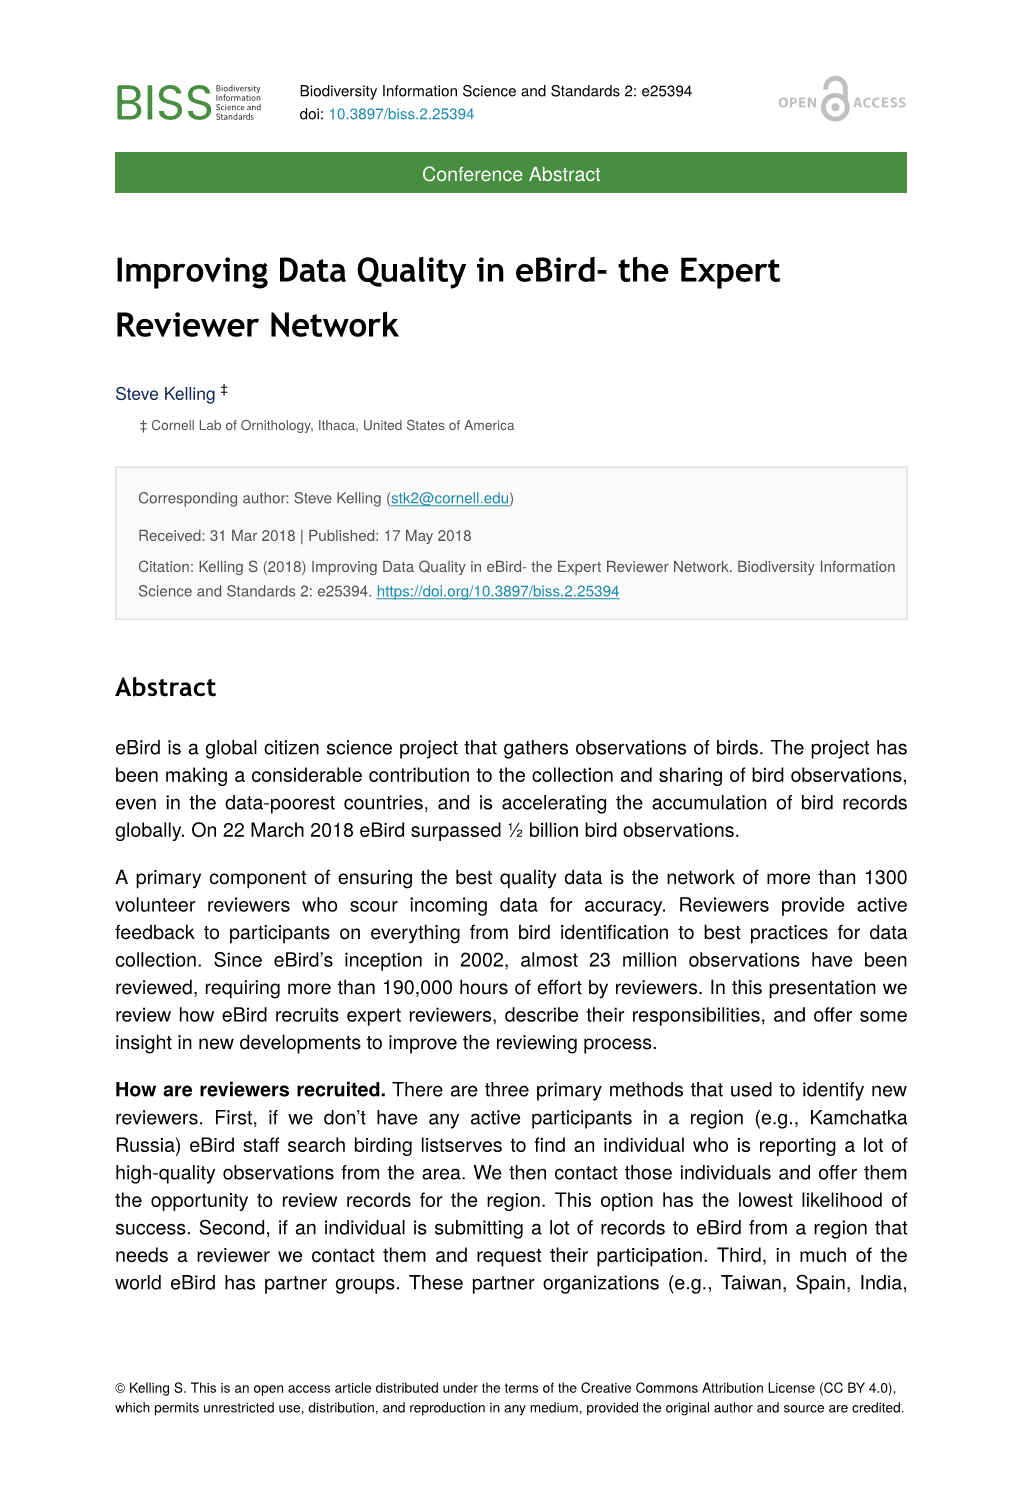 Improving Data Quality in Ebird- the Expert Reviewer Network